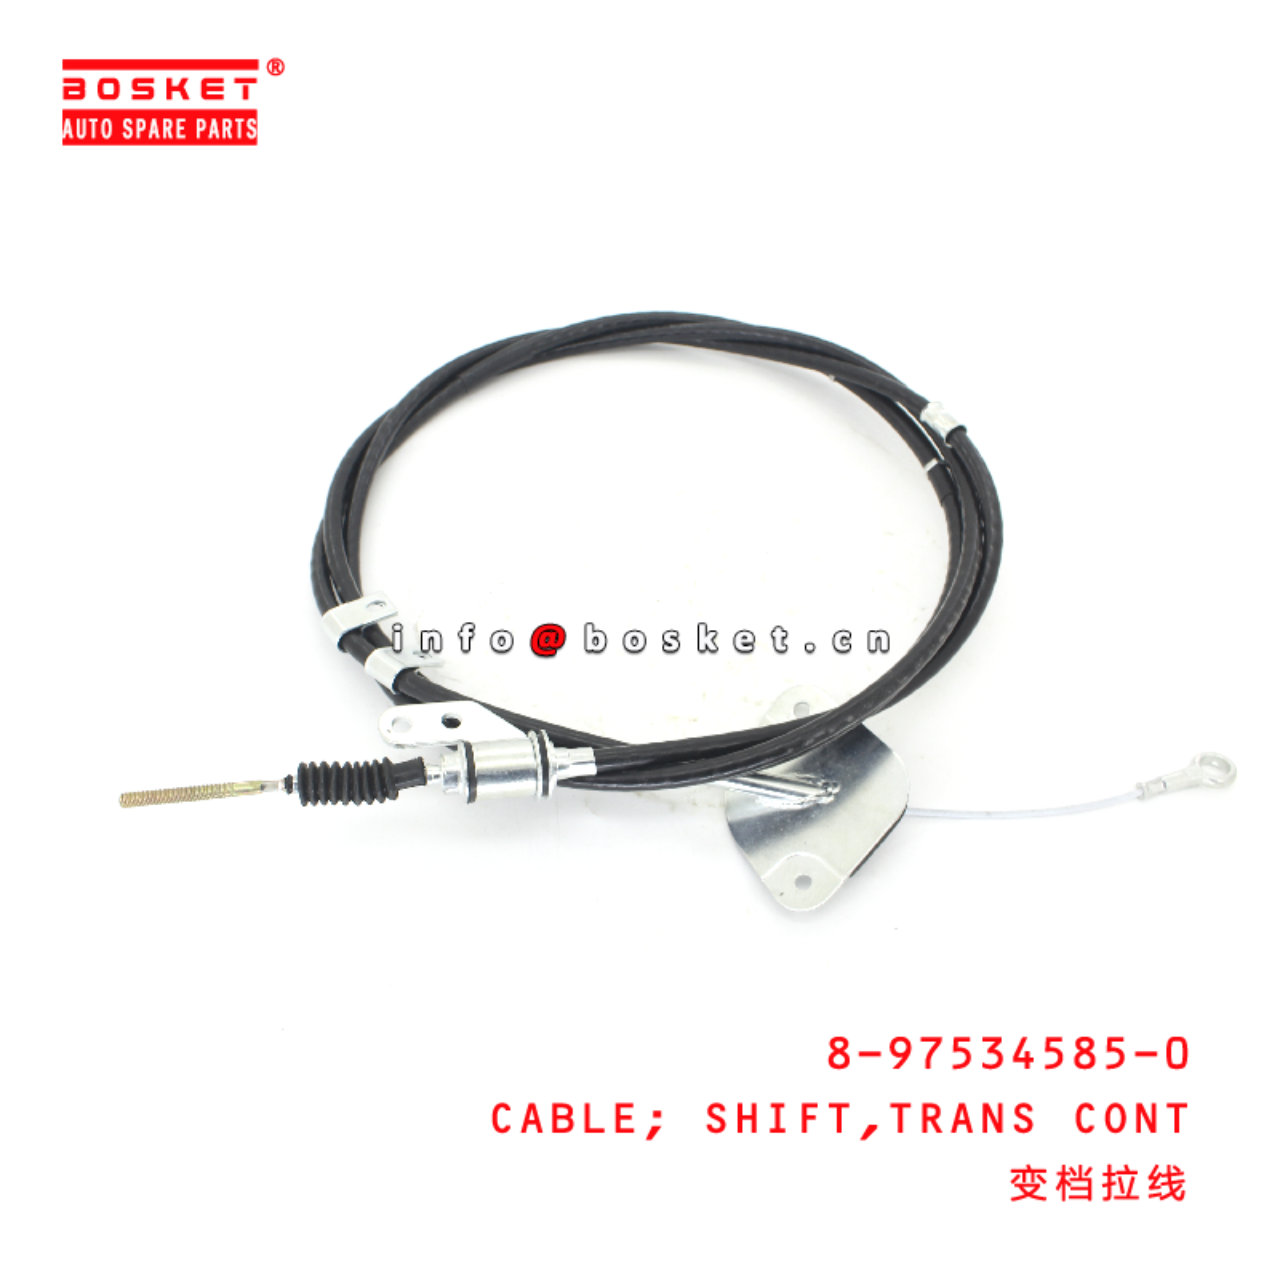 8-97534585-0 TRANSMISSION CONTROL SHIFT CABLE suitable for ISUZU 8975345850